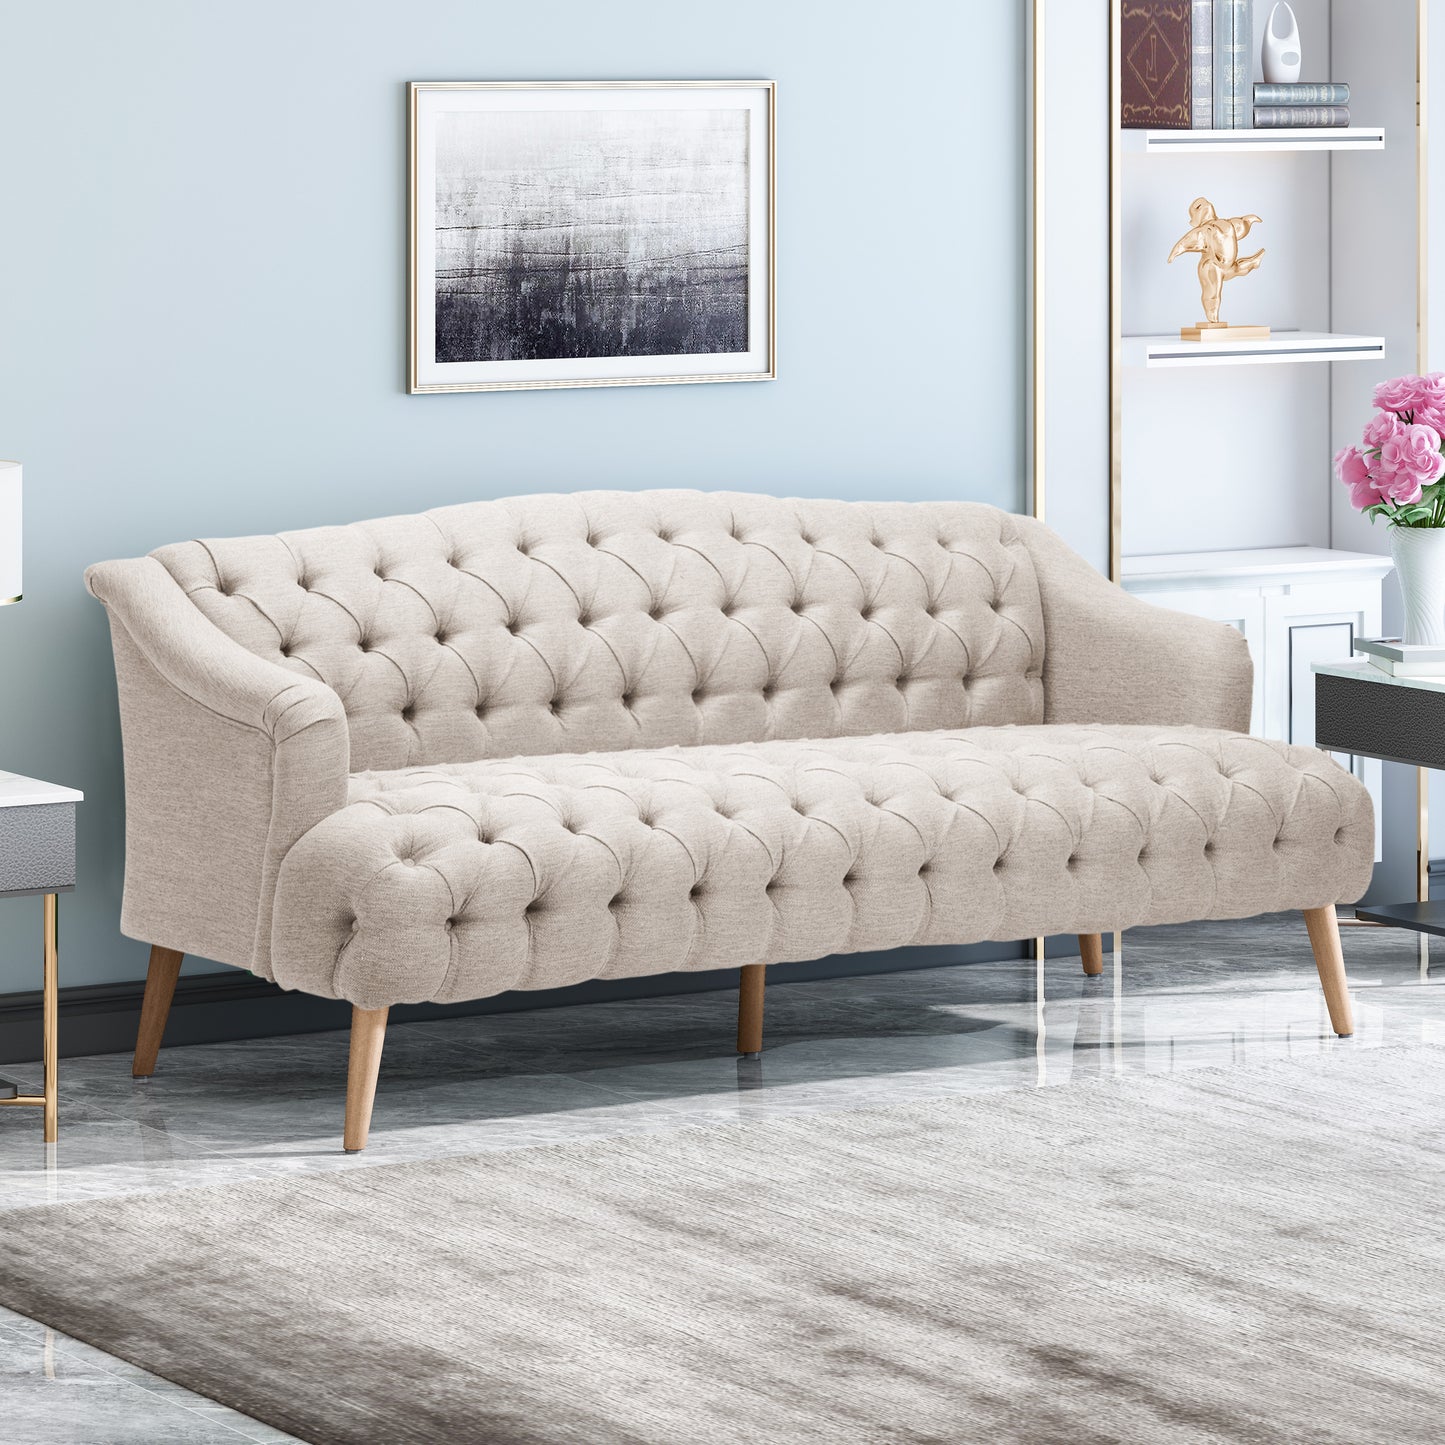 Kayleigh Contemporary Tufted Fabric 3 Seater Sofa